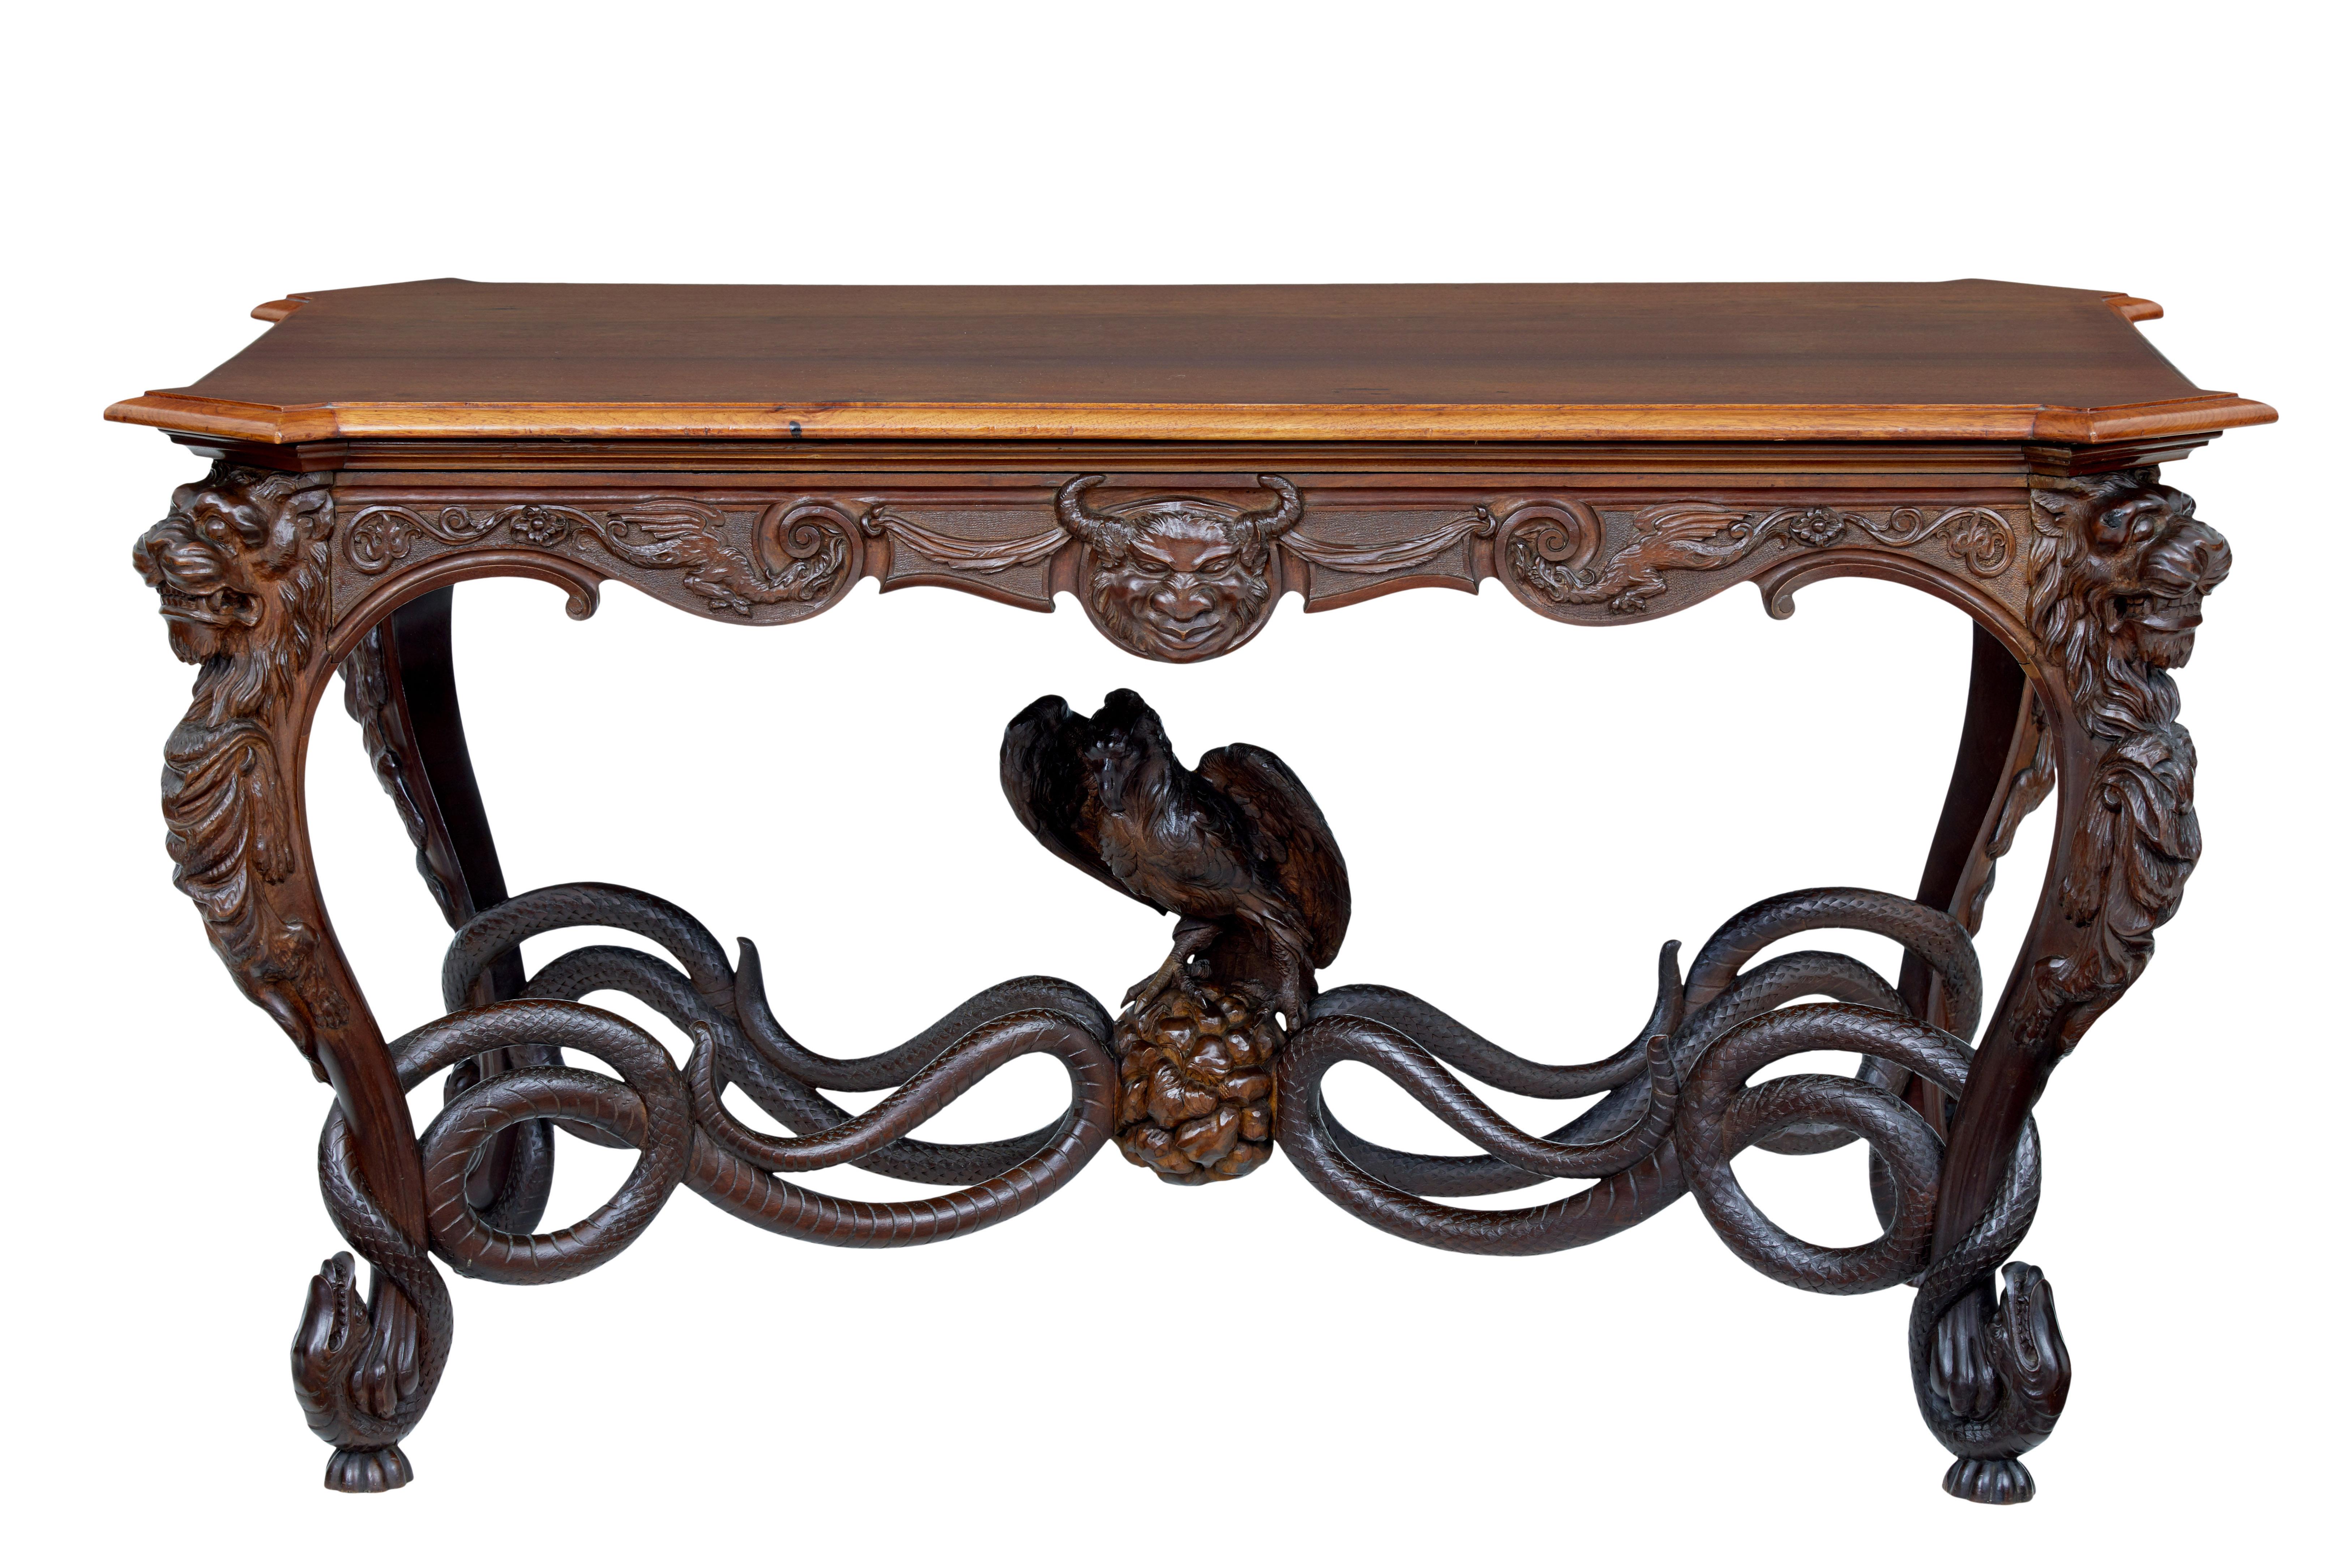 Rare and fantastic profusely carved mahogany table, circa 1870.

Simple mahogany top with canted corners but this table is all about the base. Carved devils to each frieze with swags and scrolls. Carved beast heads to the top of the legs which